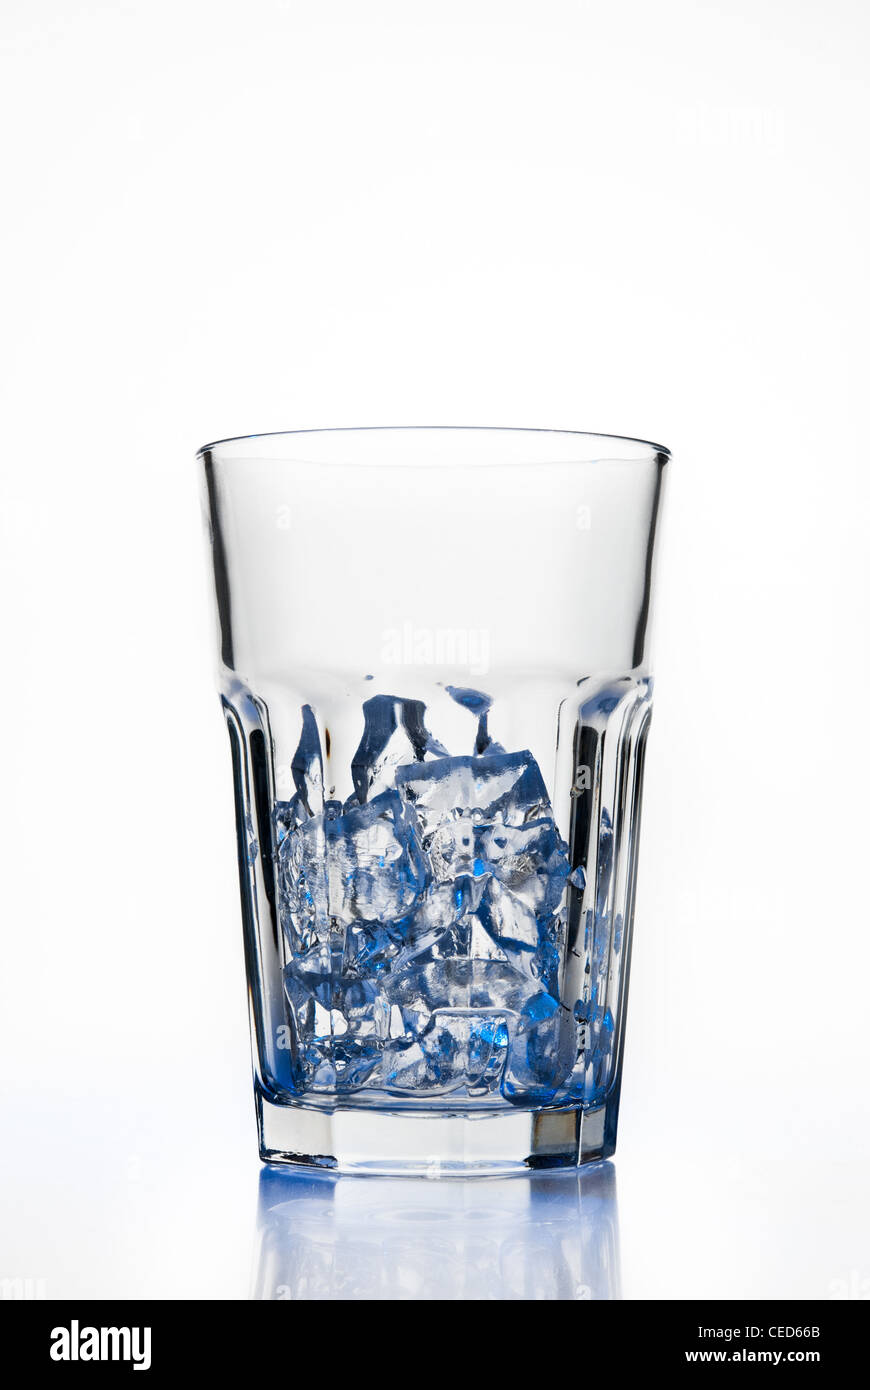 https://c8.alamy.com/comp/CED66B/glass-with-ice-cubes-isolated-on-white-background-CED66B.jpg